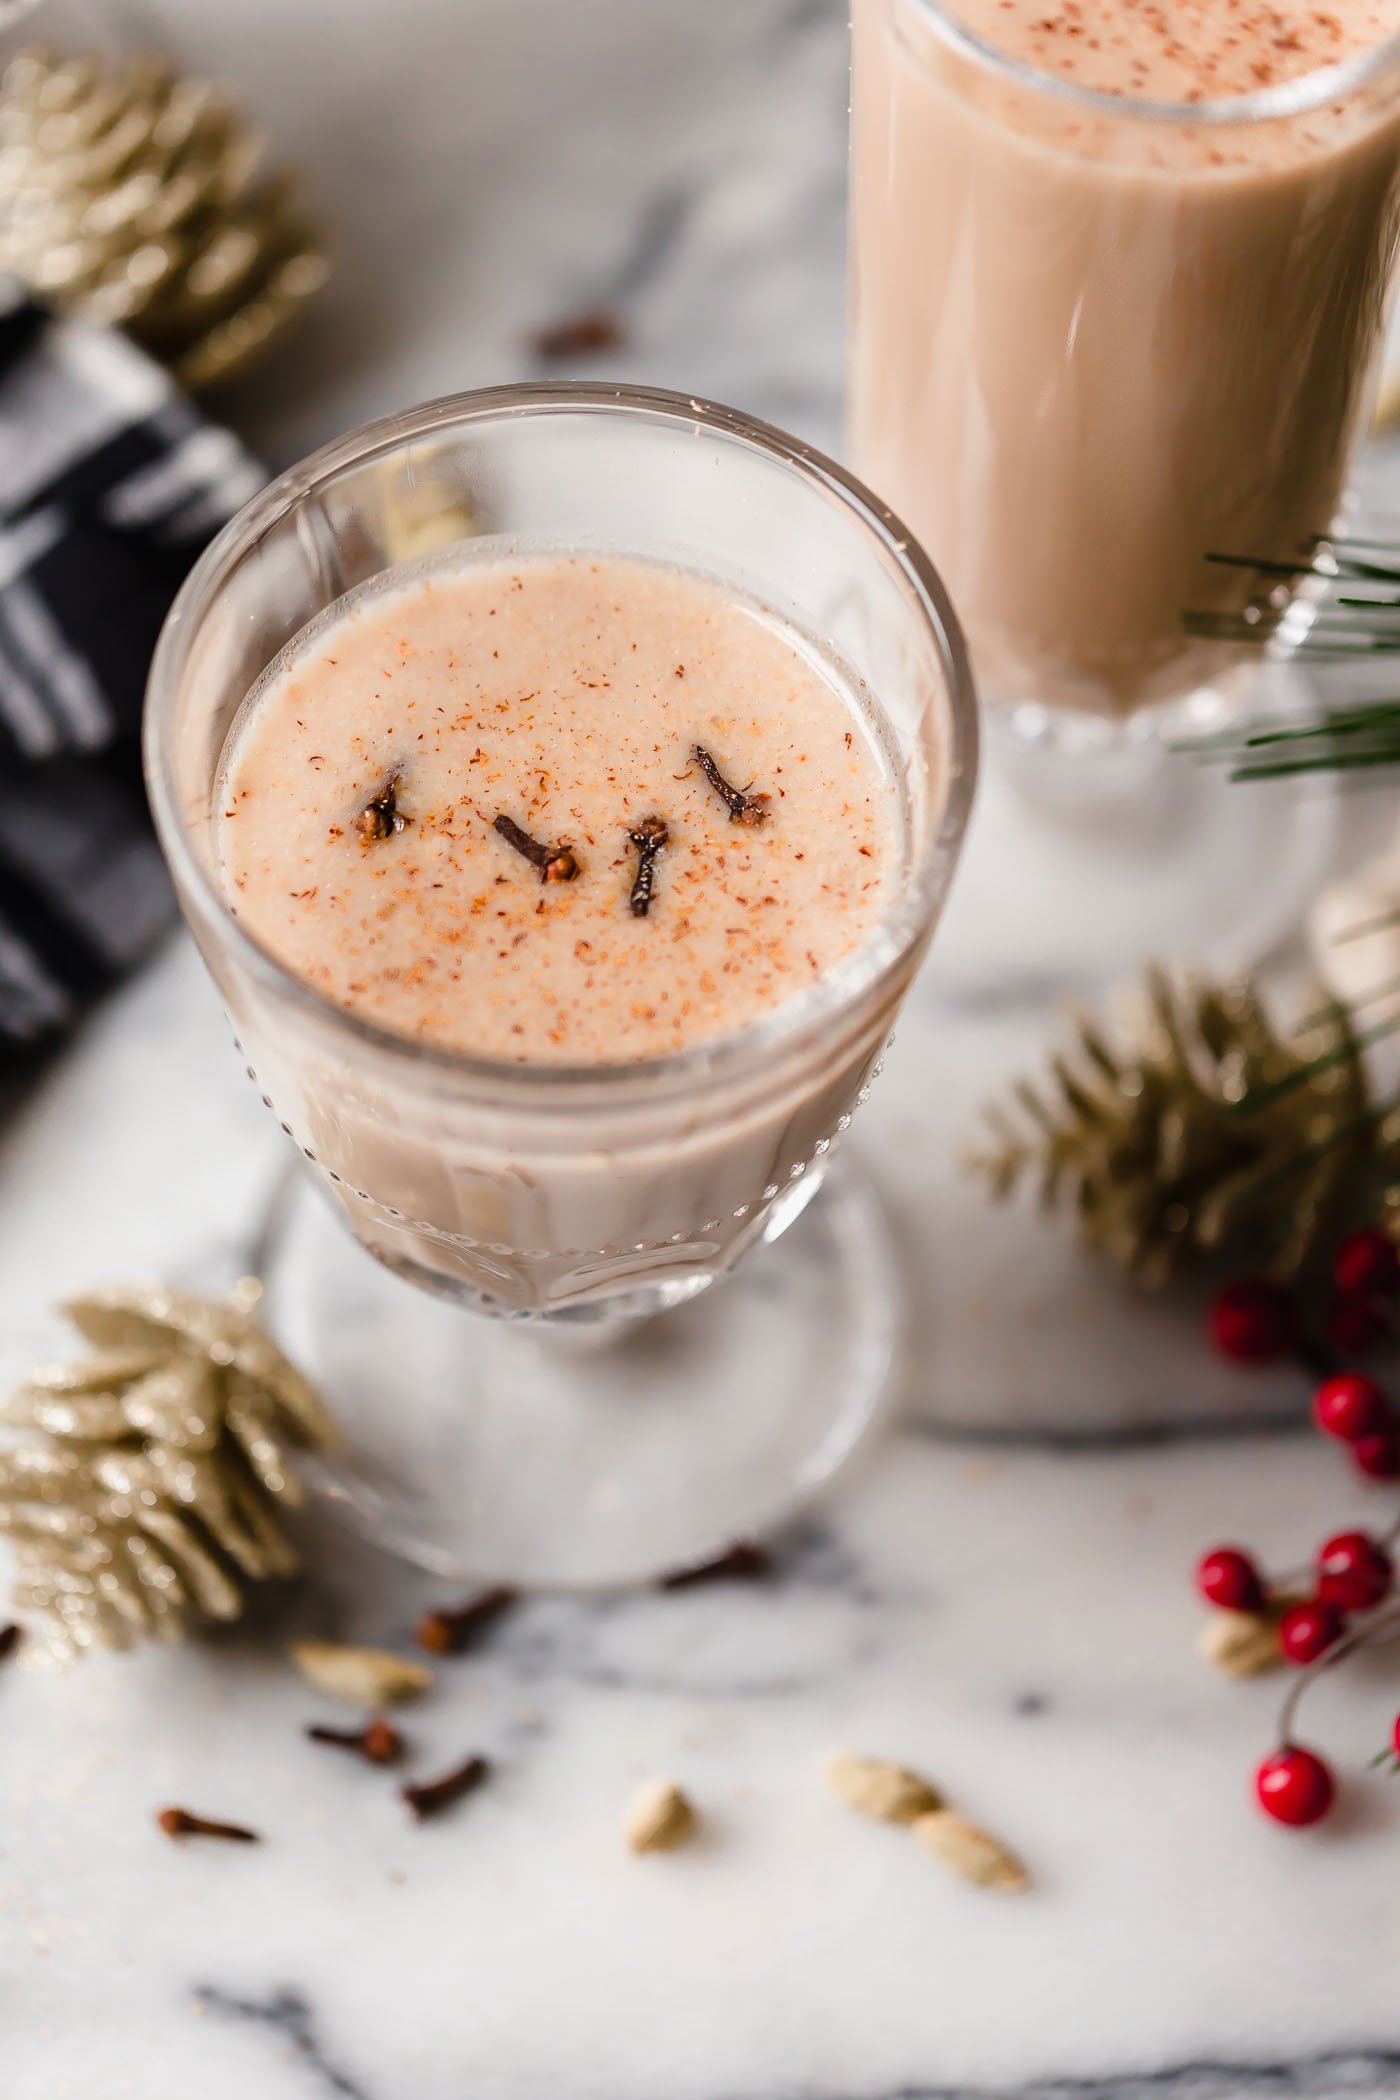 smoky spiked coconut chai tea latte. an easy spiked chai tea recipe! a coconut chai tea latte, lightly sweetened with maple syrup & spiked with mezcal & tequila. an easy & cozy boozy chai tea that’s perfect to warm up on a cold winter night during the holiday season. #playswellwithbutter #spikedchaitea #spikedchailatte #spikedchai #chaicocktail #coconutchai #easycocktailrecipes #fallcocktailrecipes #wintercocktailrecipes #holidaycocktailrecipes #christmascocktailrecipes #mezcalcocktails